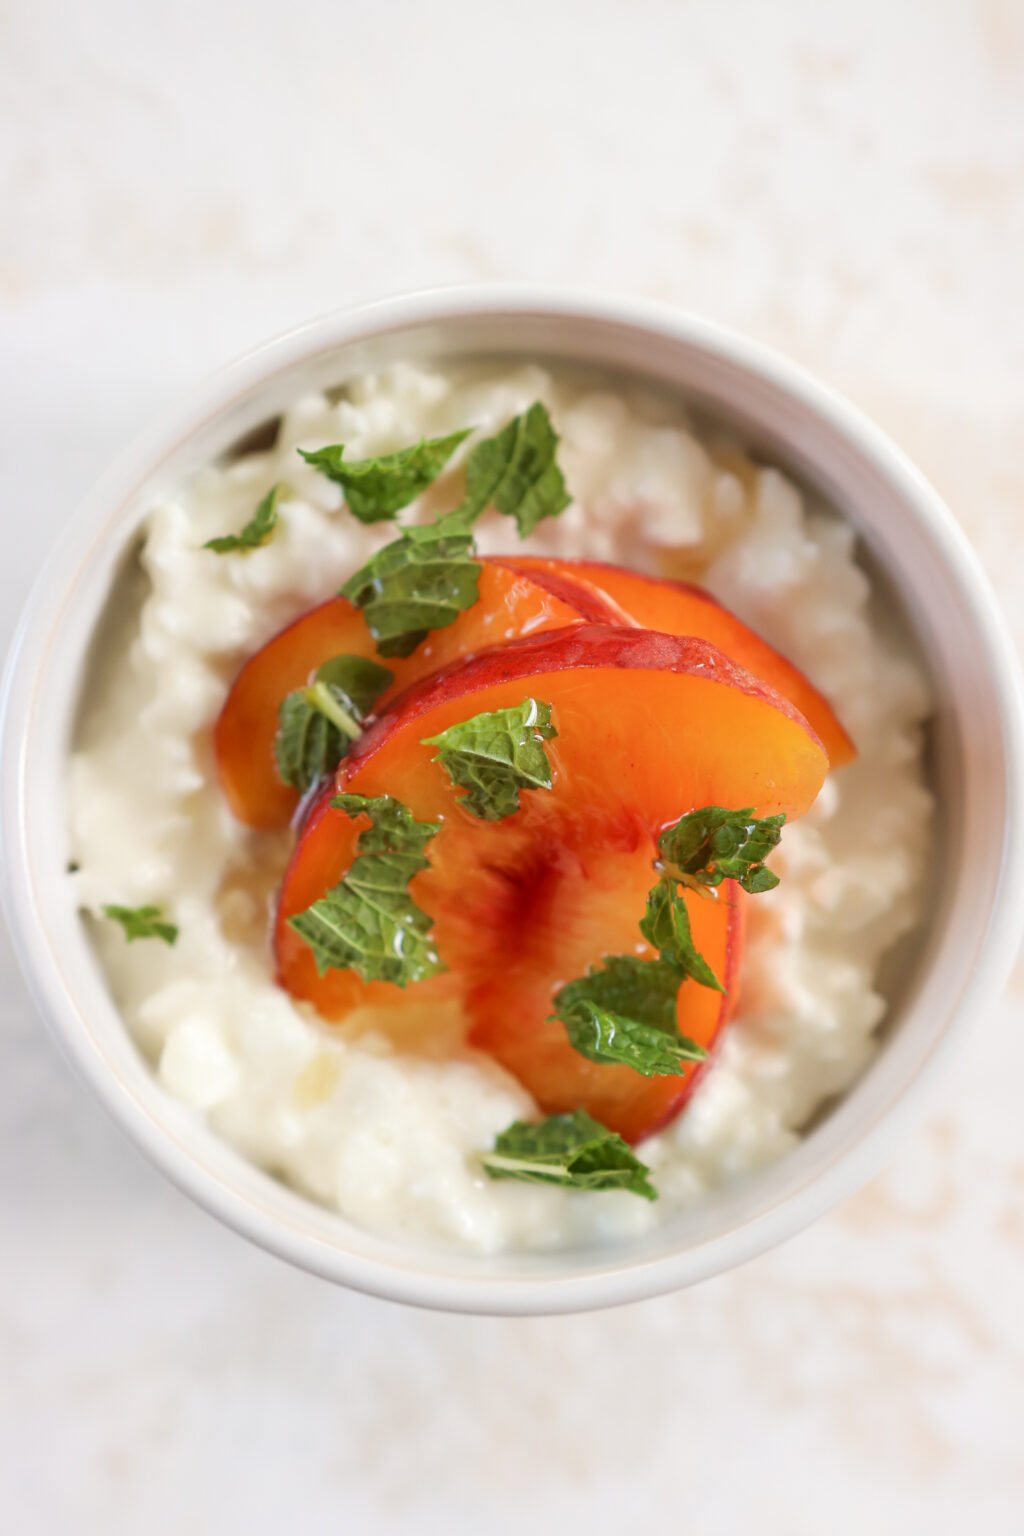 A white bowl is on an off white cloth. In the bowl is cottage cheese with slices of peaches topped with mint. There is a gold spoon beside the bowl.